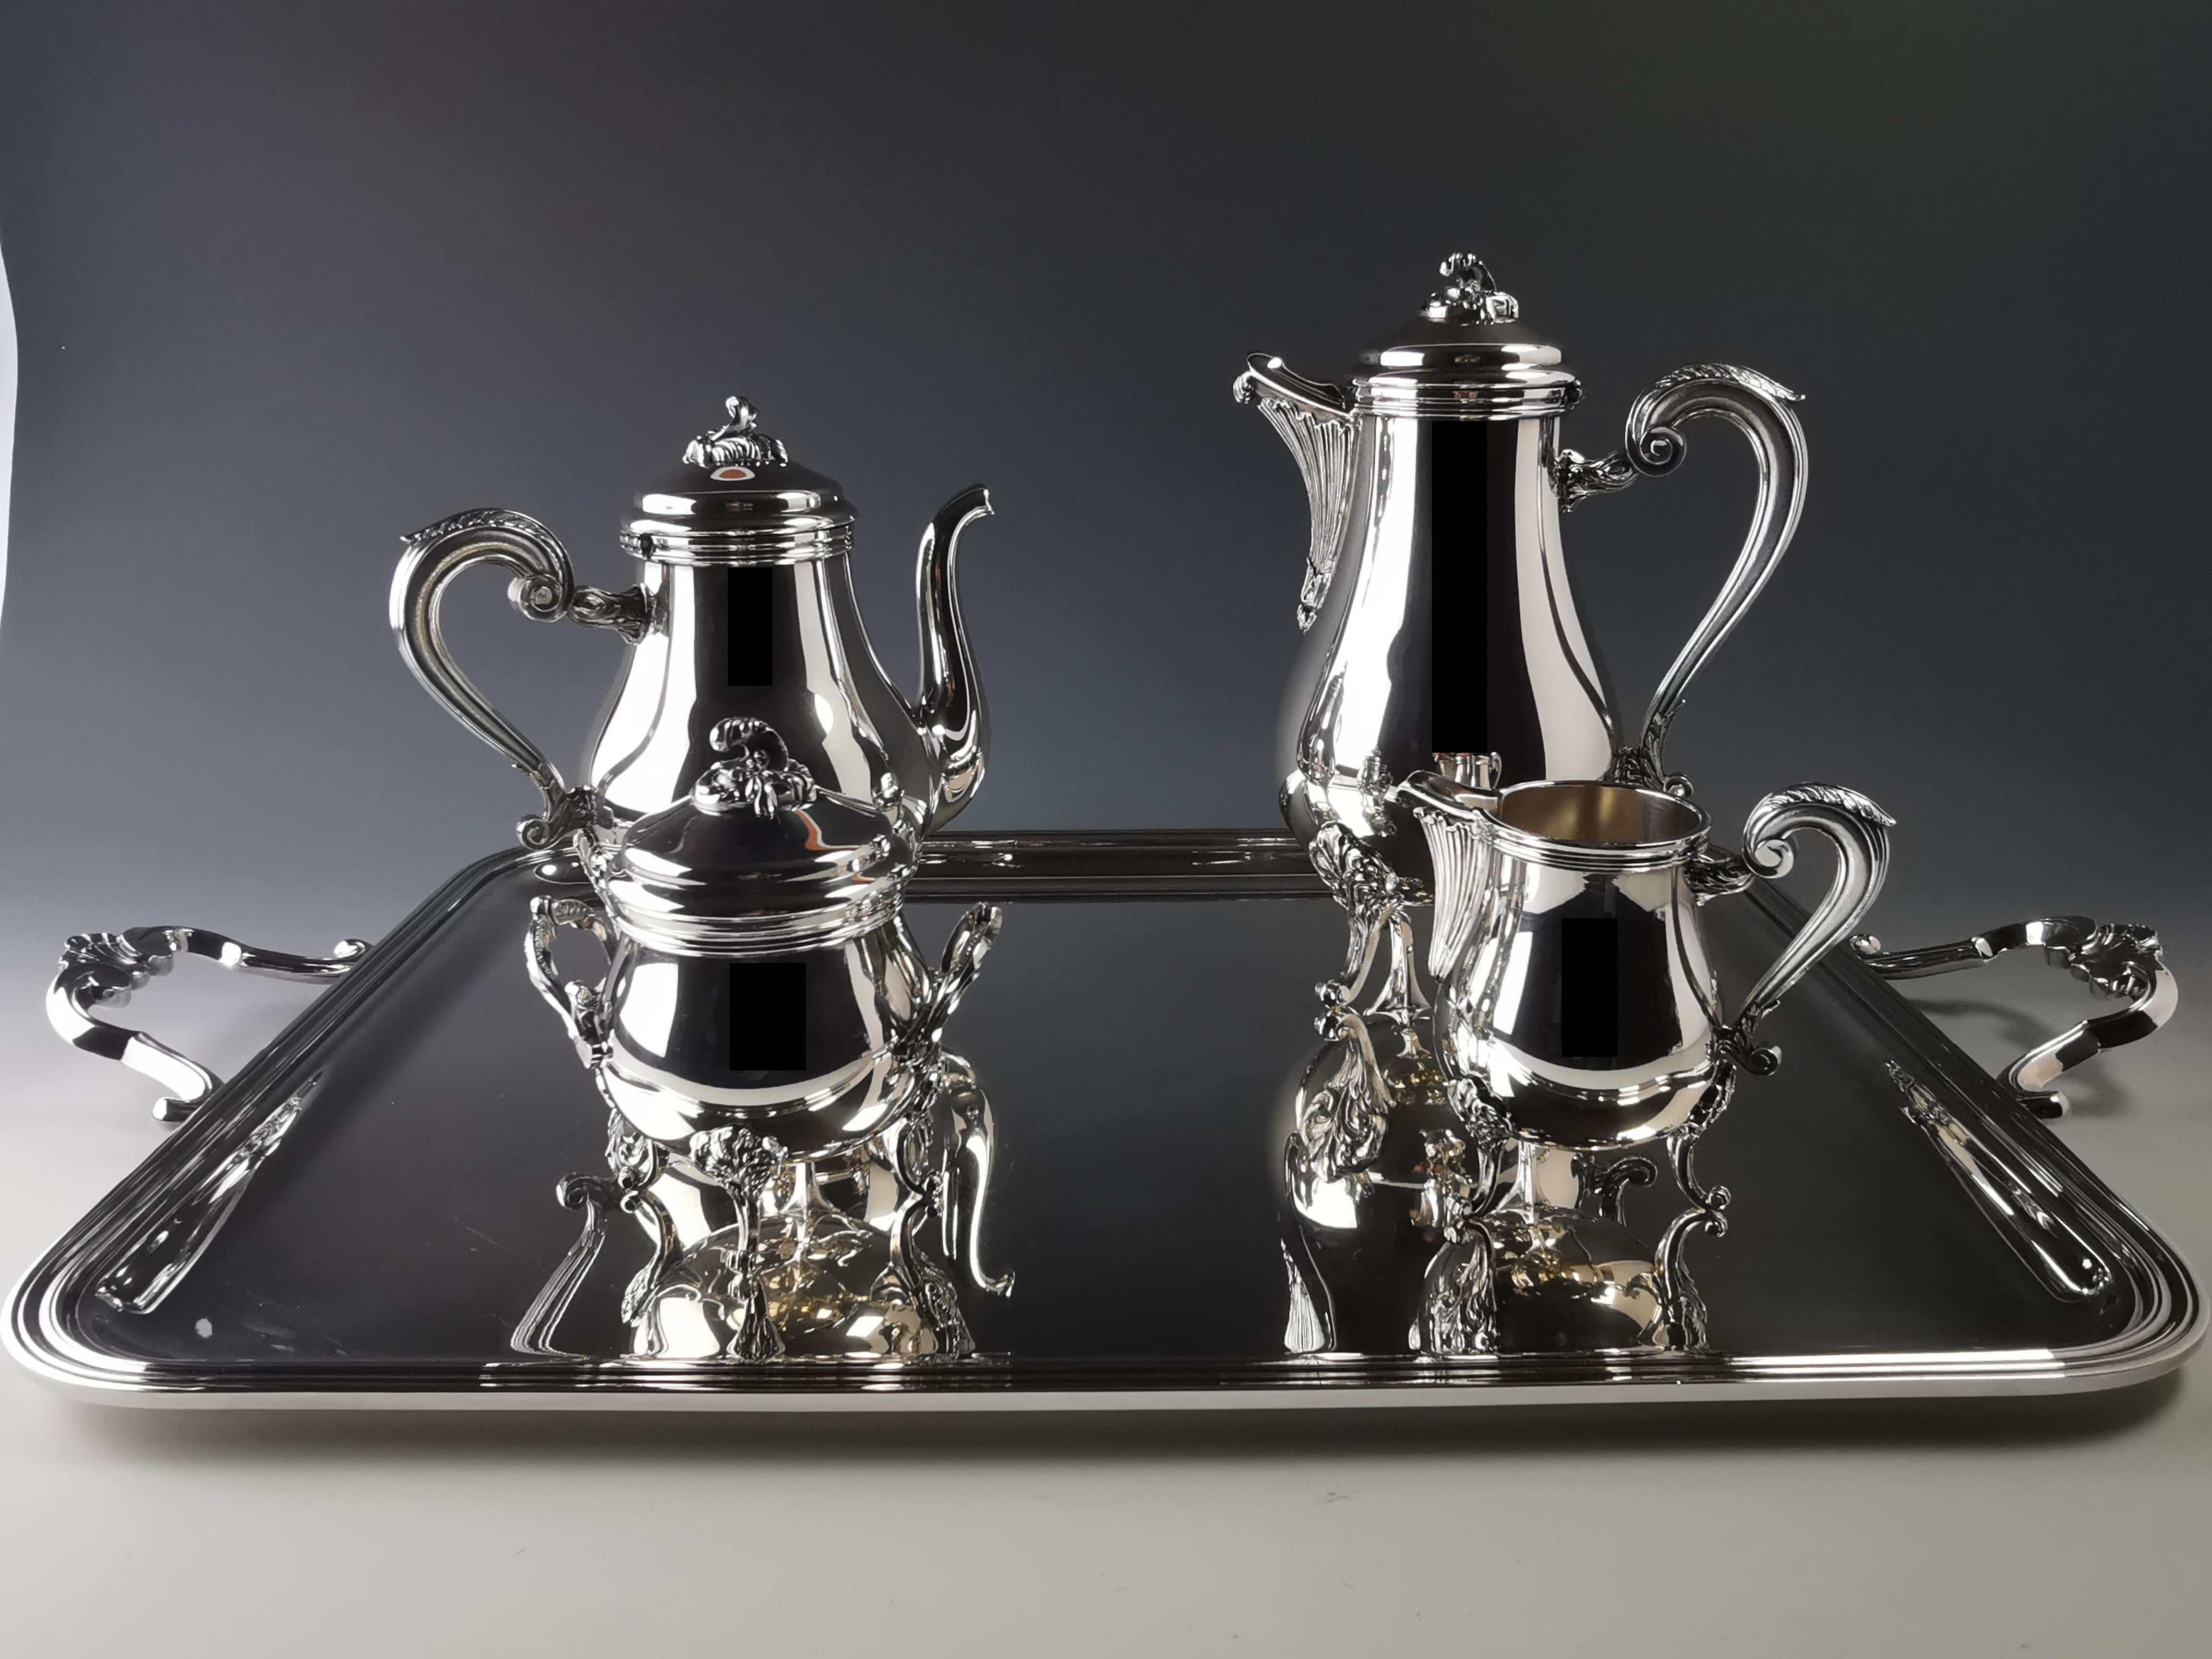 Magnificent coffee tea service from the French brand Christofle
Famous 